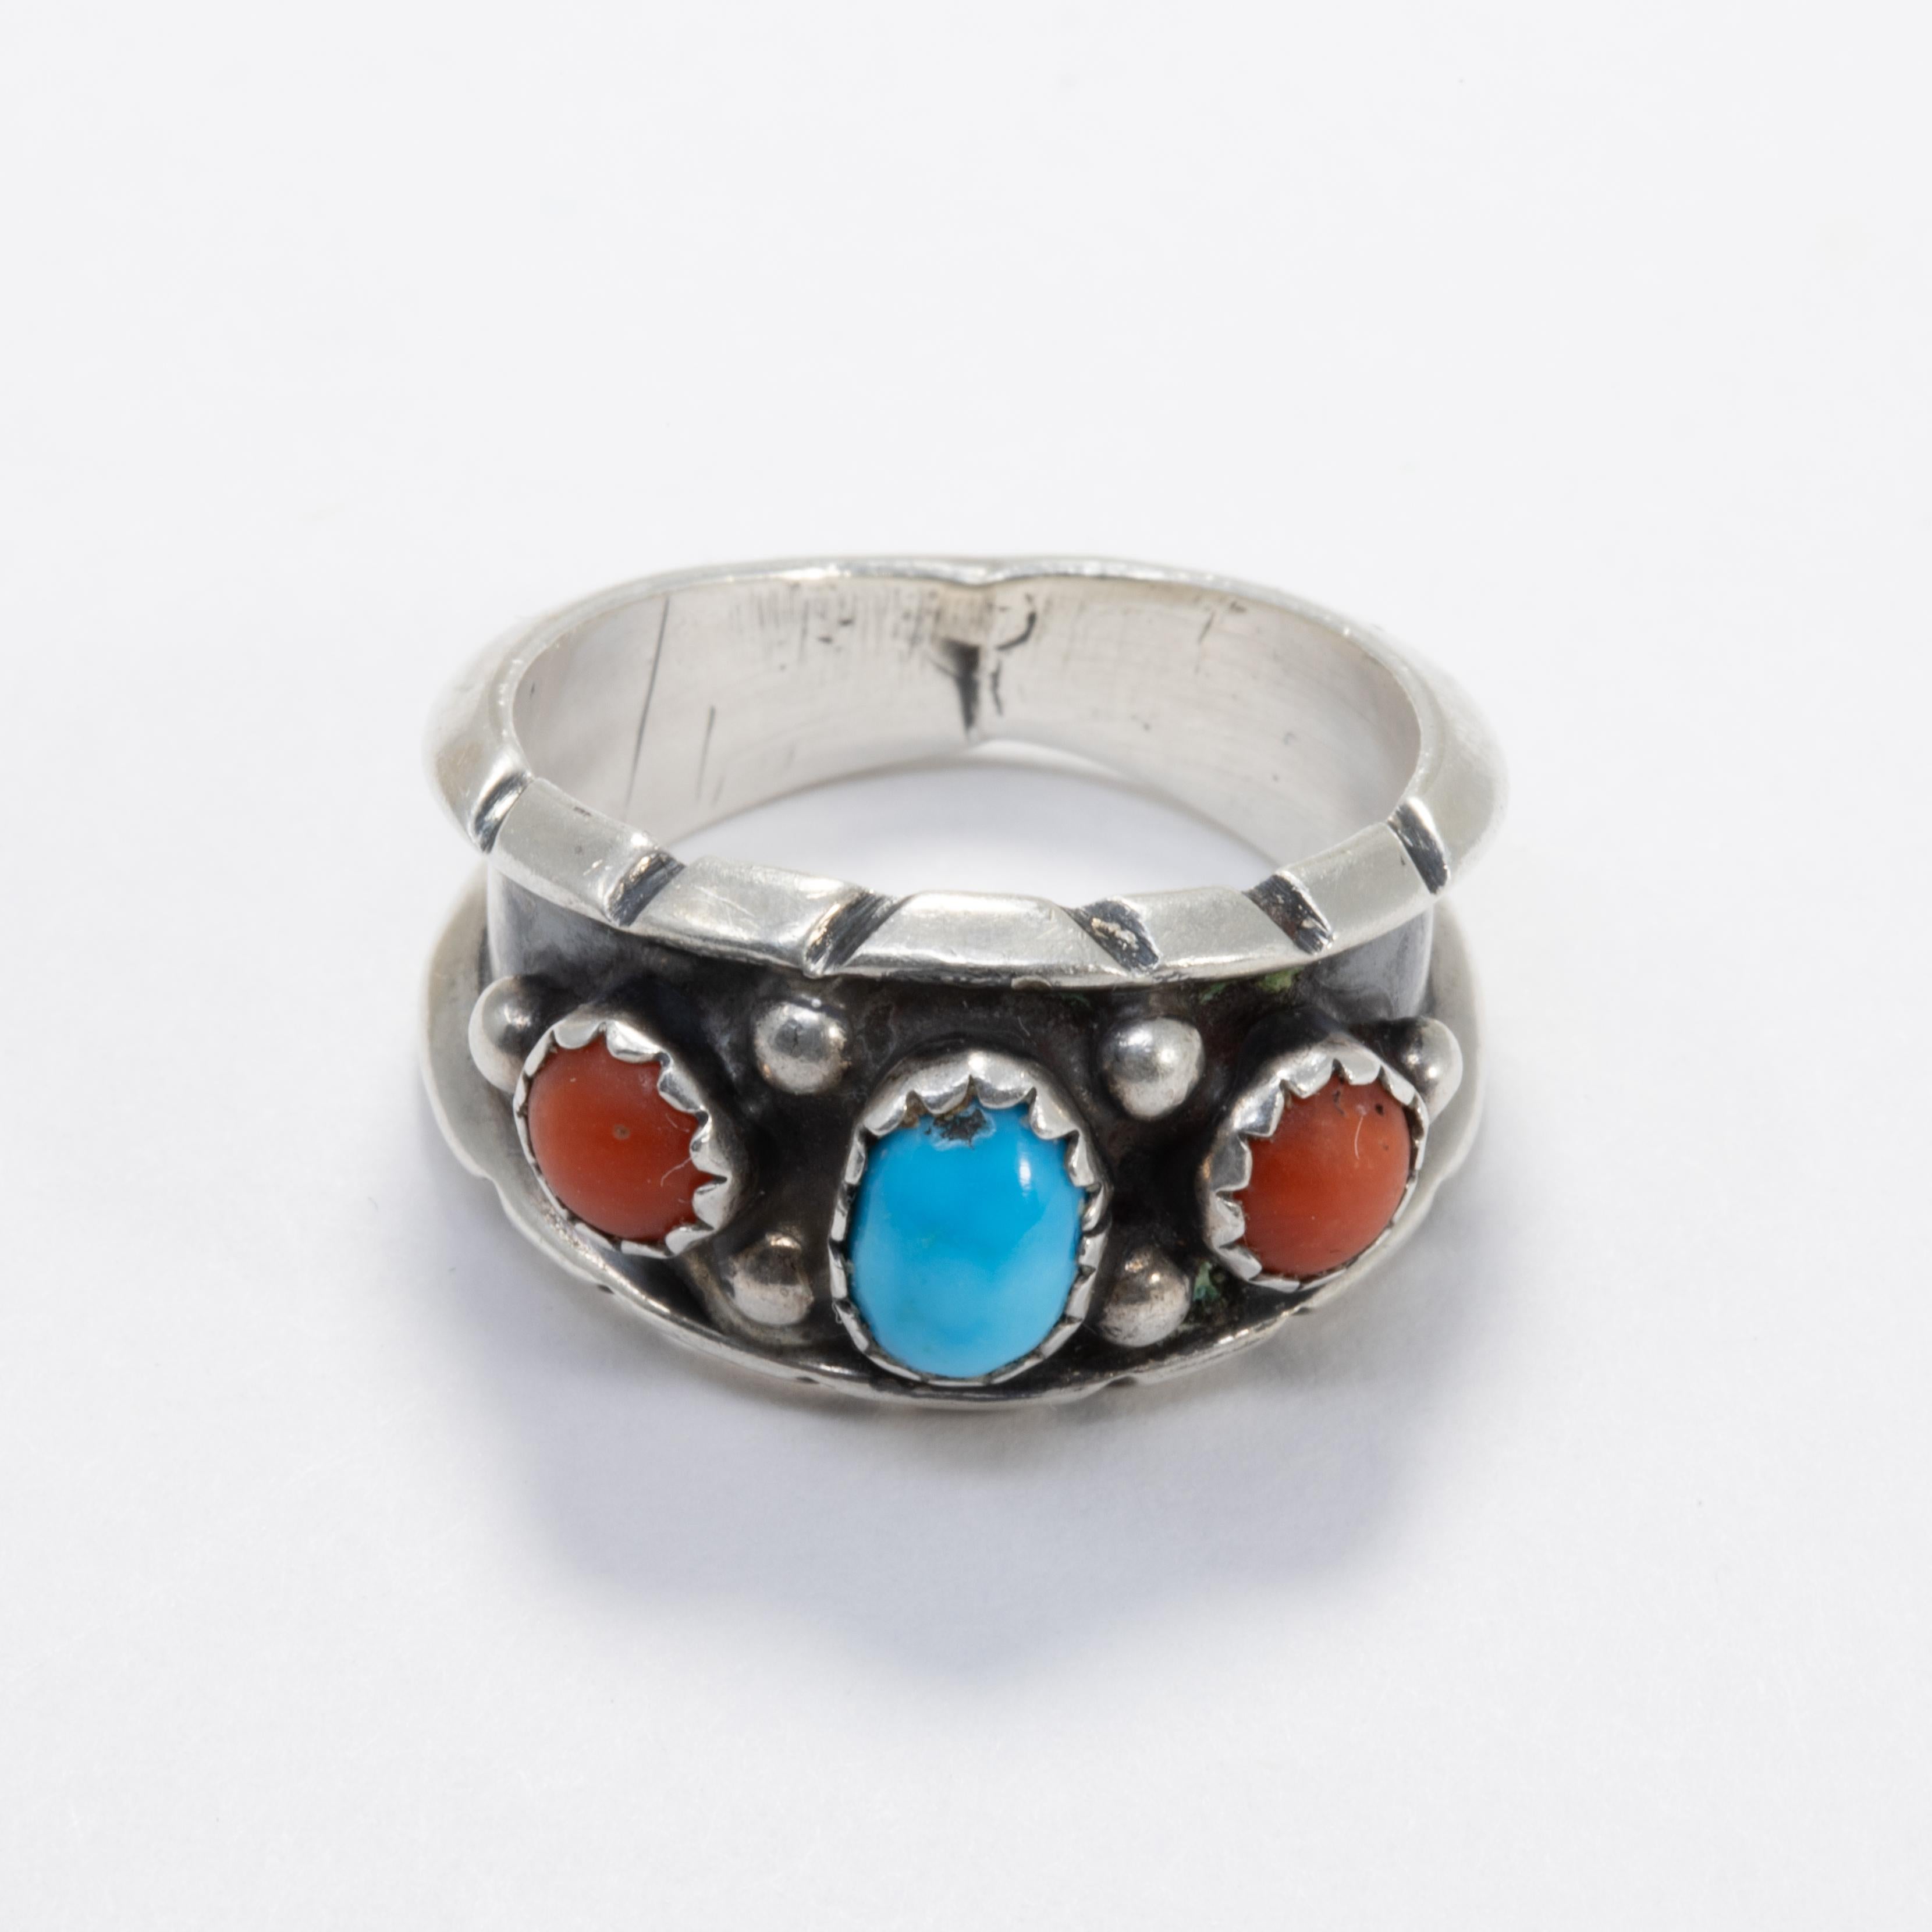 An exquisitely craft Native American Navajo tribe ring. This tapered sterling silver band features coral and turquoise cabochons set in sawtooth bezels. A stylish accessory!

Hallmarks: N1, bear paw motif
Ring size US 7.25